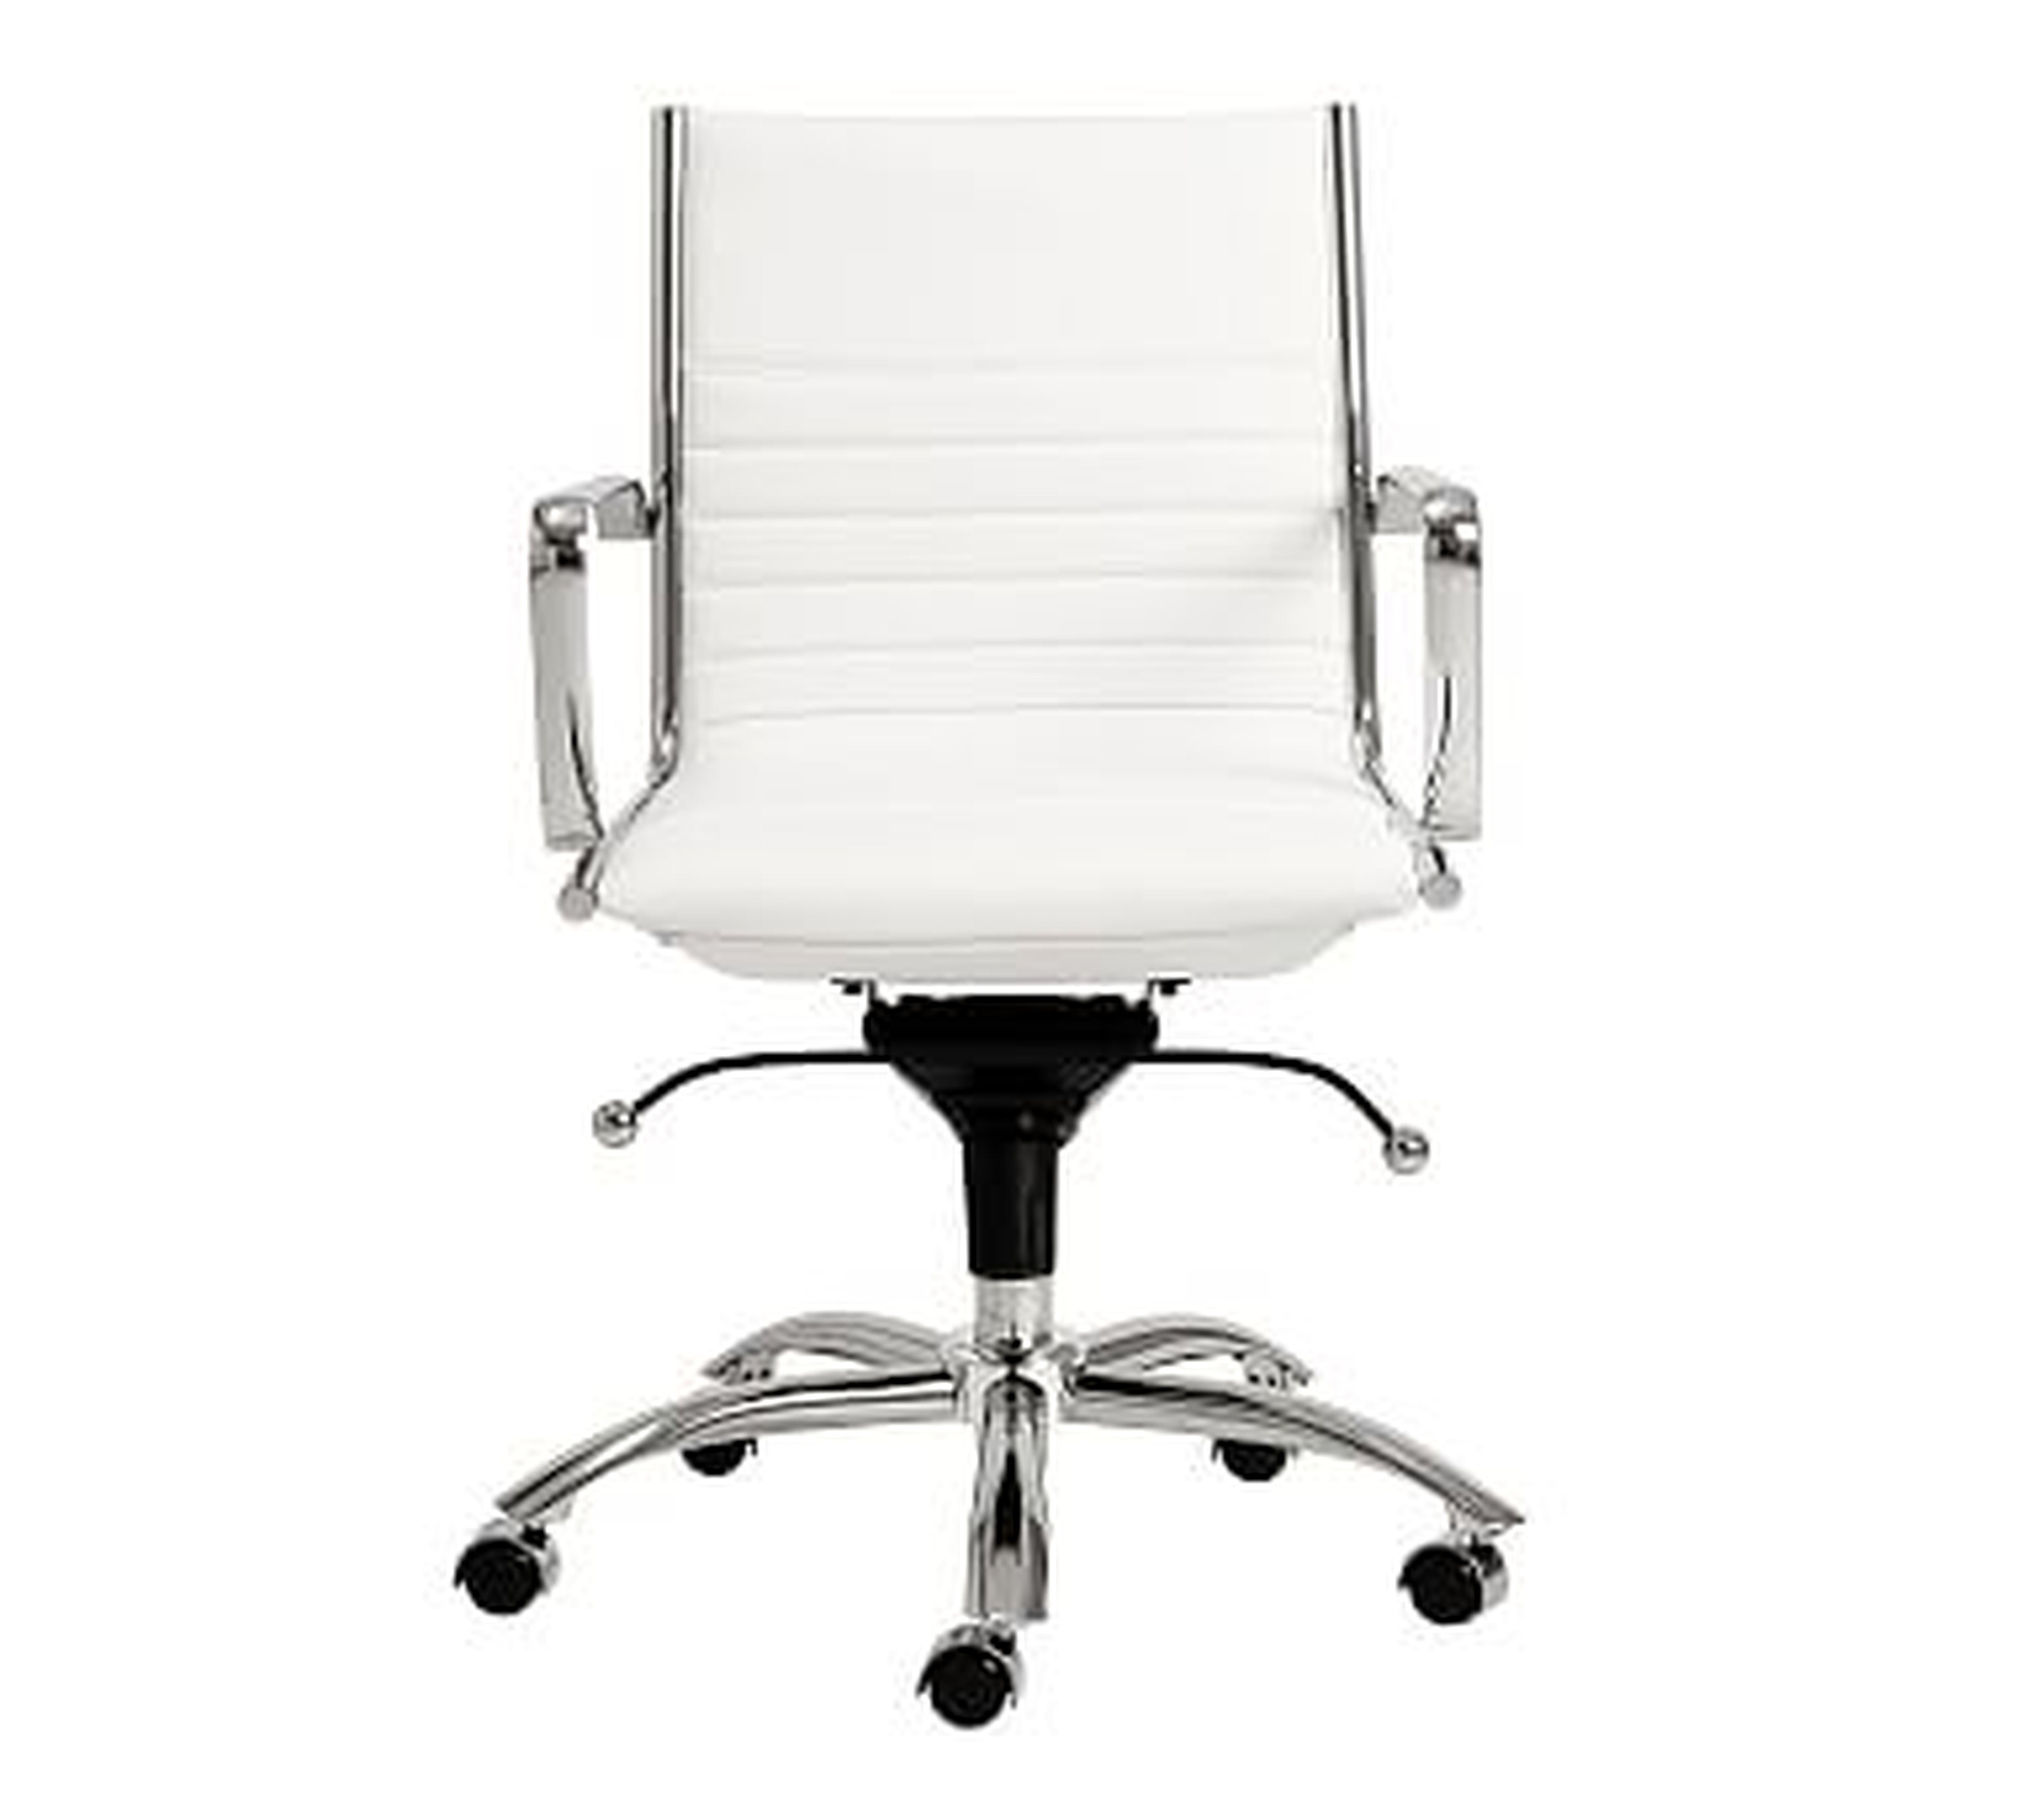 Fowler Low Back Desk Chair, White - Pottery Barn